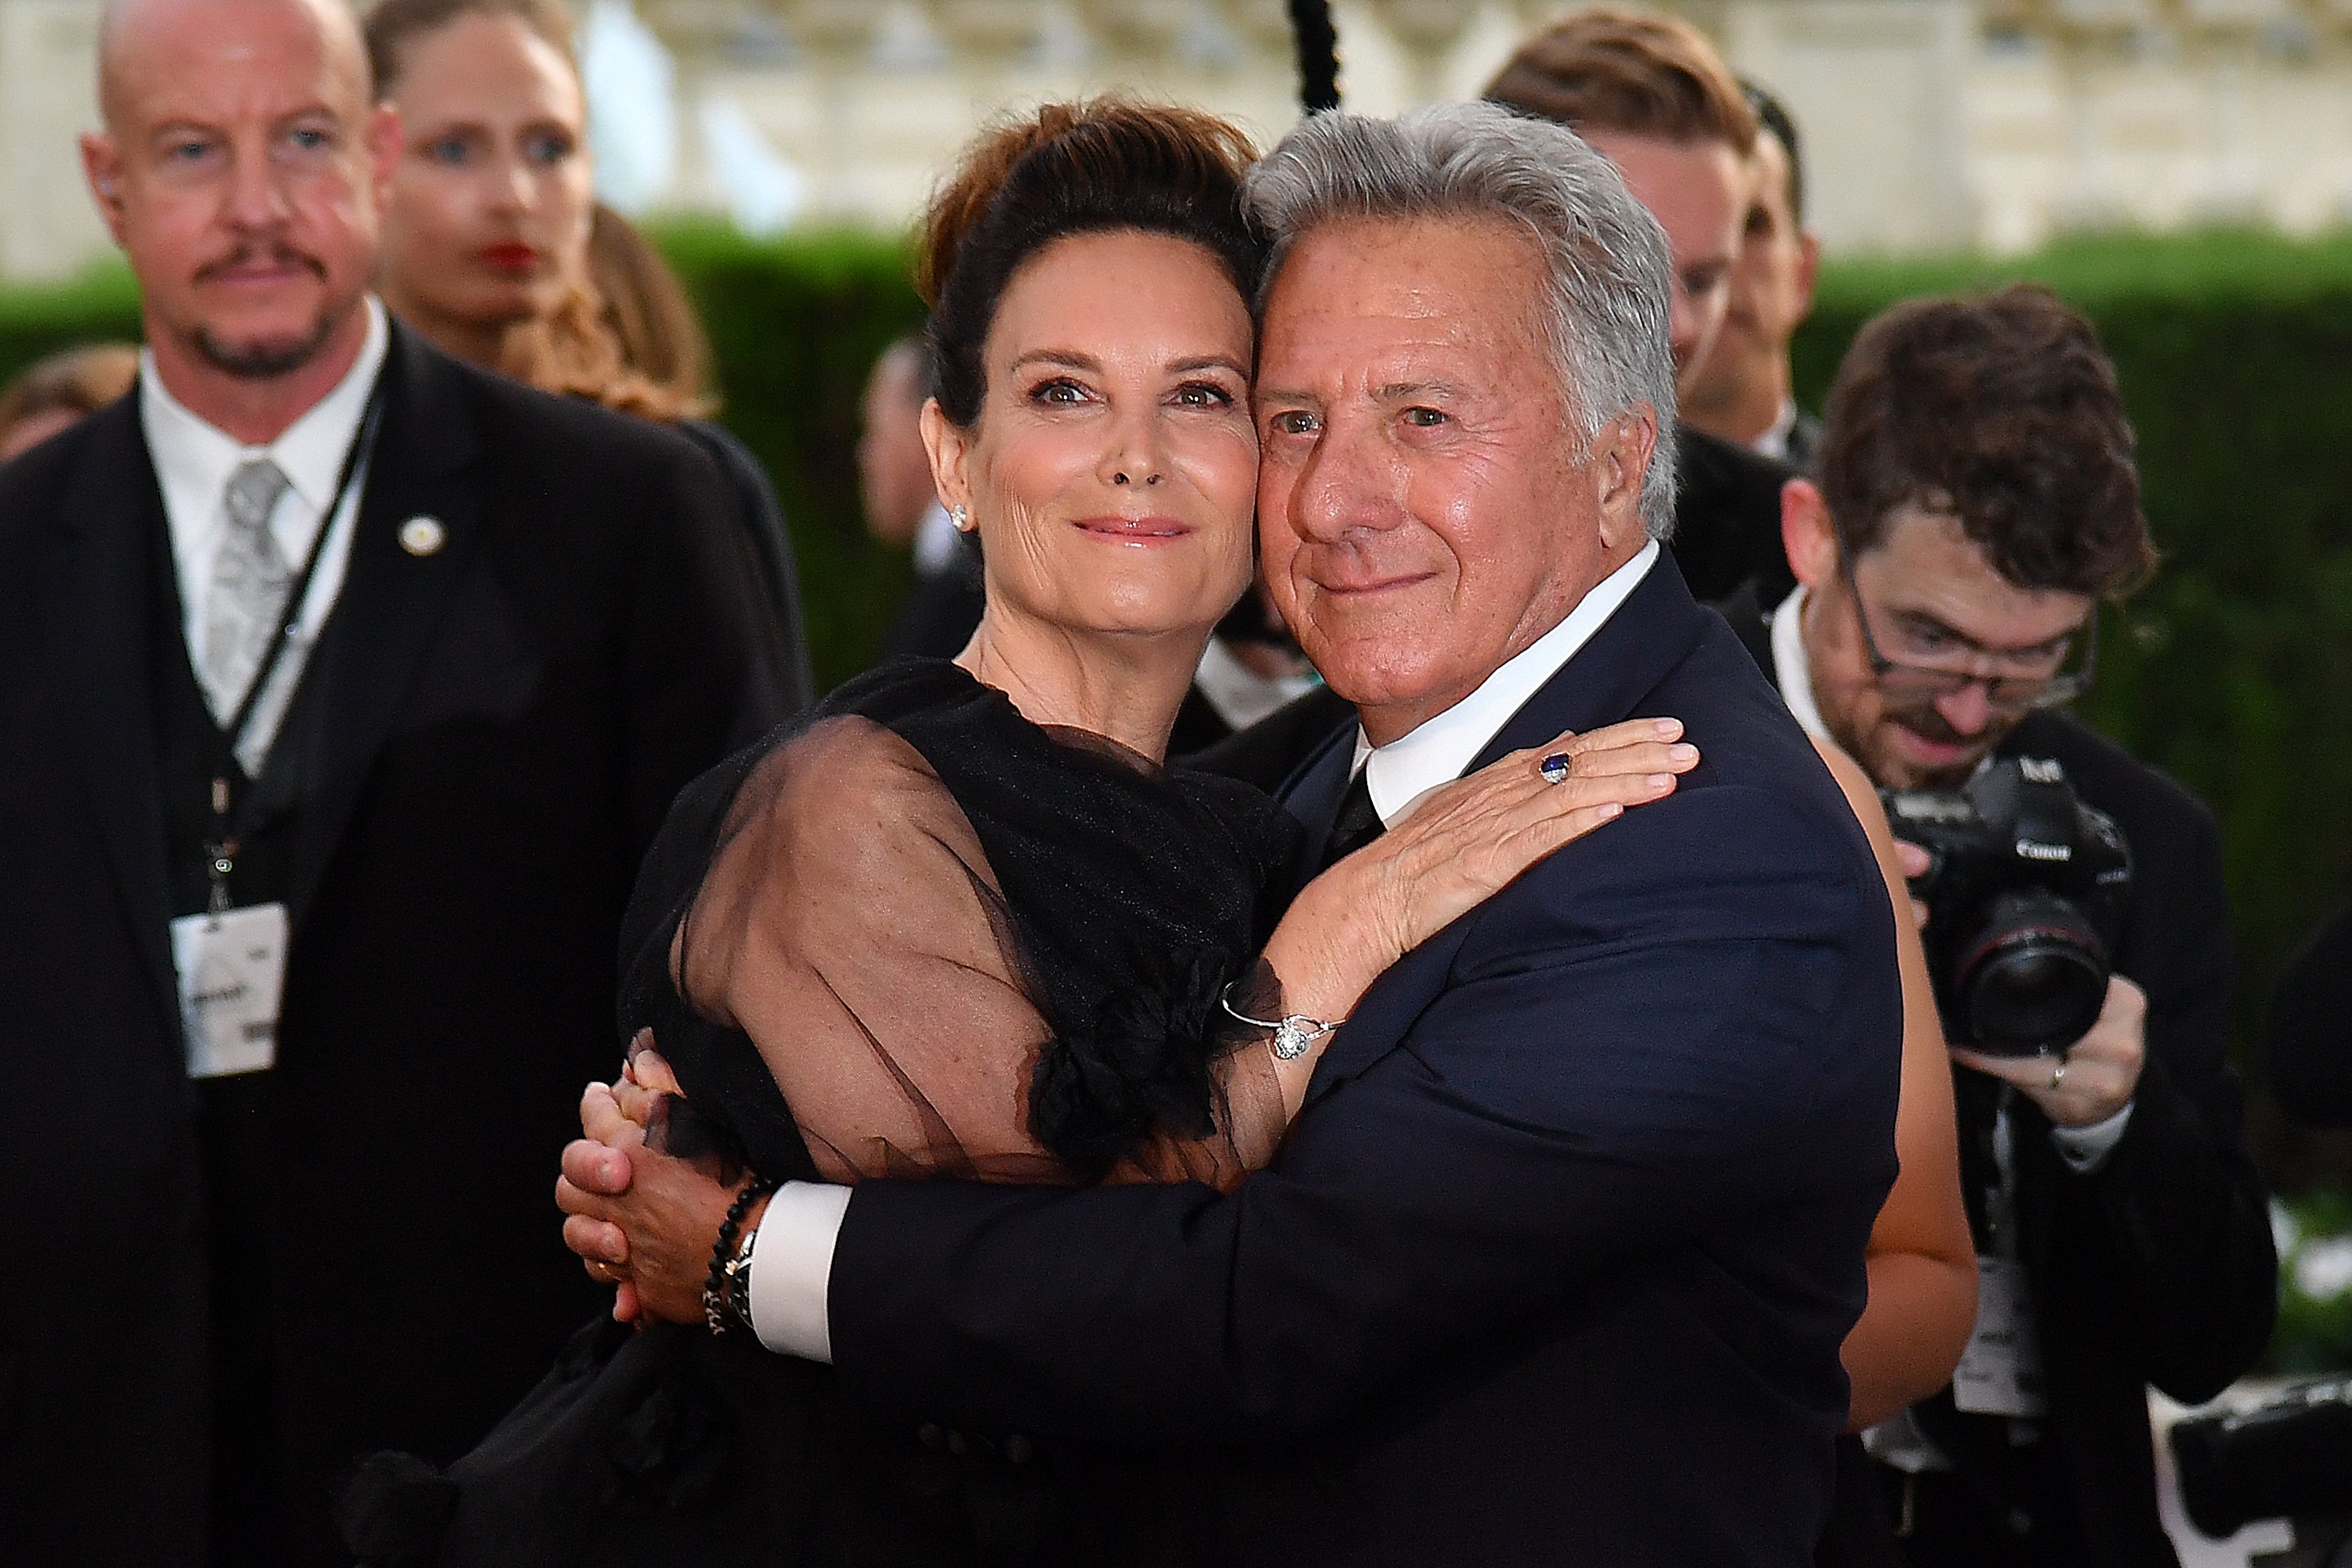 Dustin Hoffman and his wife Lisa pose as they arrive for the amfAR's 24th Cinema Against AIDS Gala at the Hotel du Cap-Eden-Roc on May 25, 2017 in Cap d'Antibes, France | Photo: Getty Images